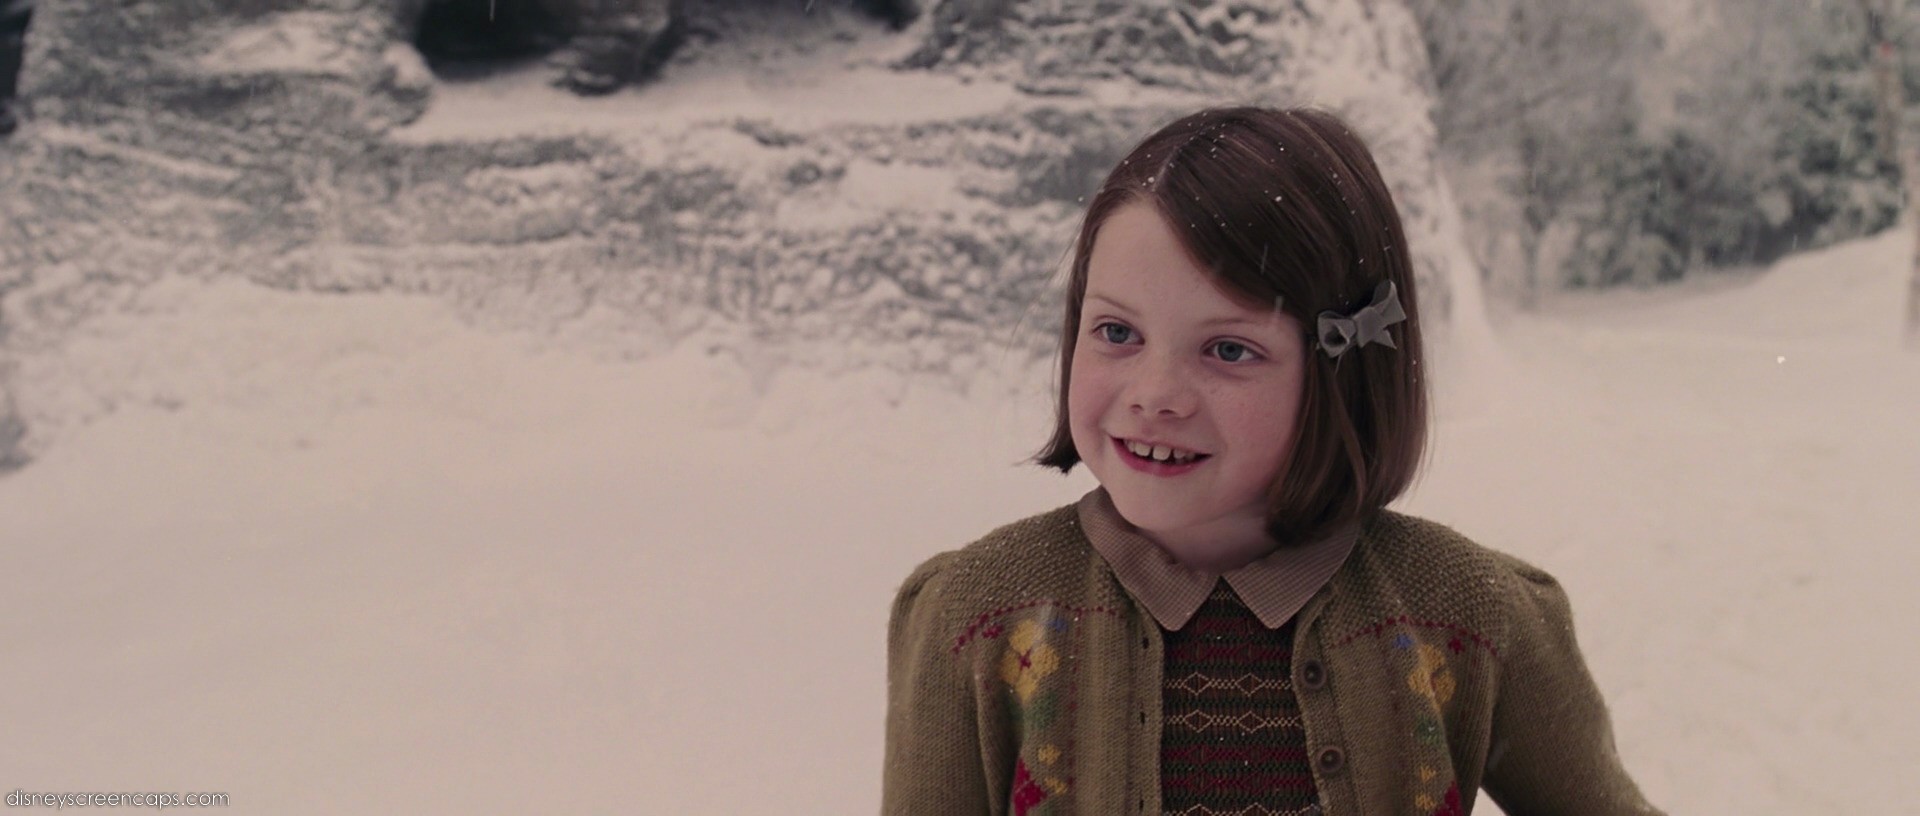 The Chronicles Of Narnia Image Pictures Lucy Pevensie And